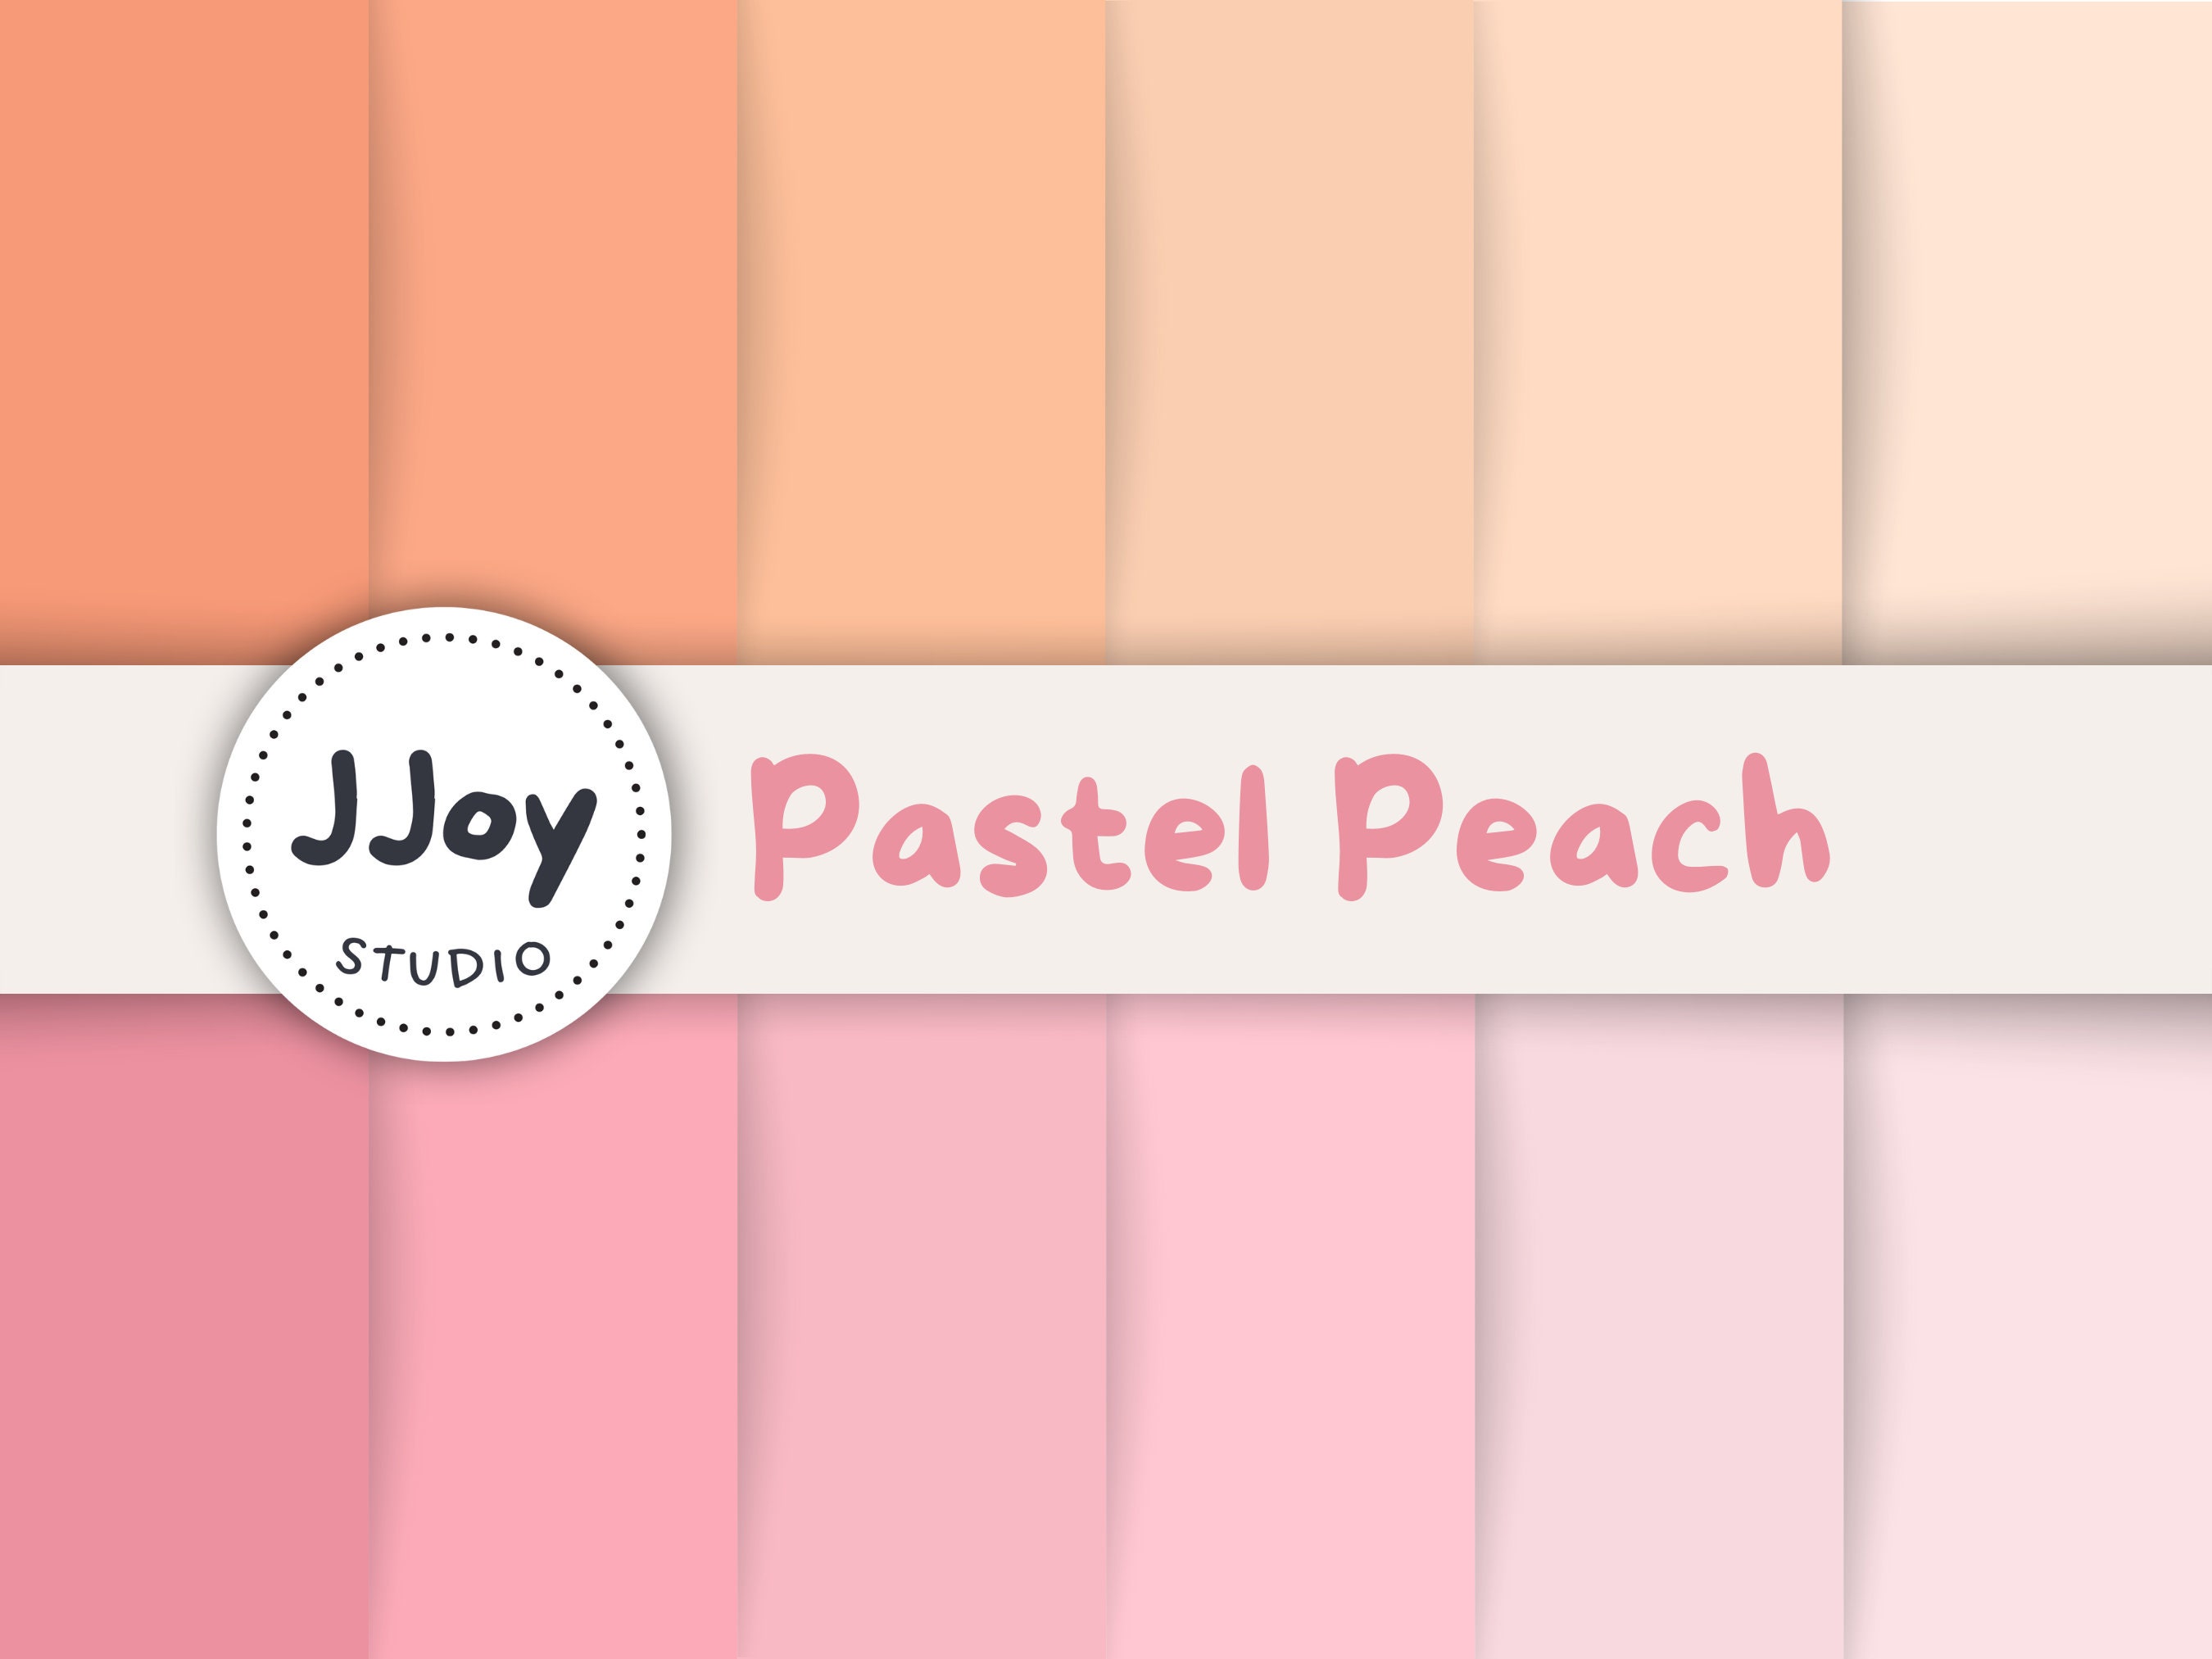 FIMO Soft Pastel Serie Polymer Clay, Peach pastel, Nr. 405, 57g 2oz,  Oven-hardening Polymer Modeling Clay, Pastel Colors by STAEDTLER 